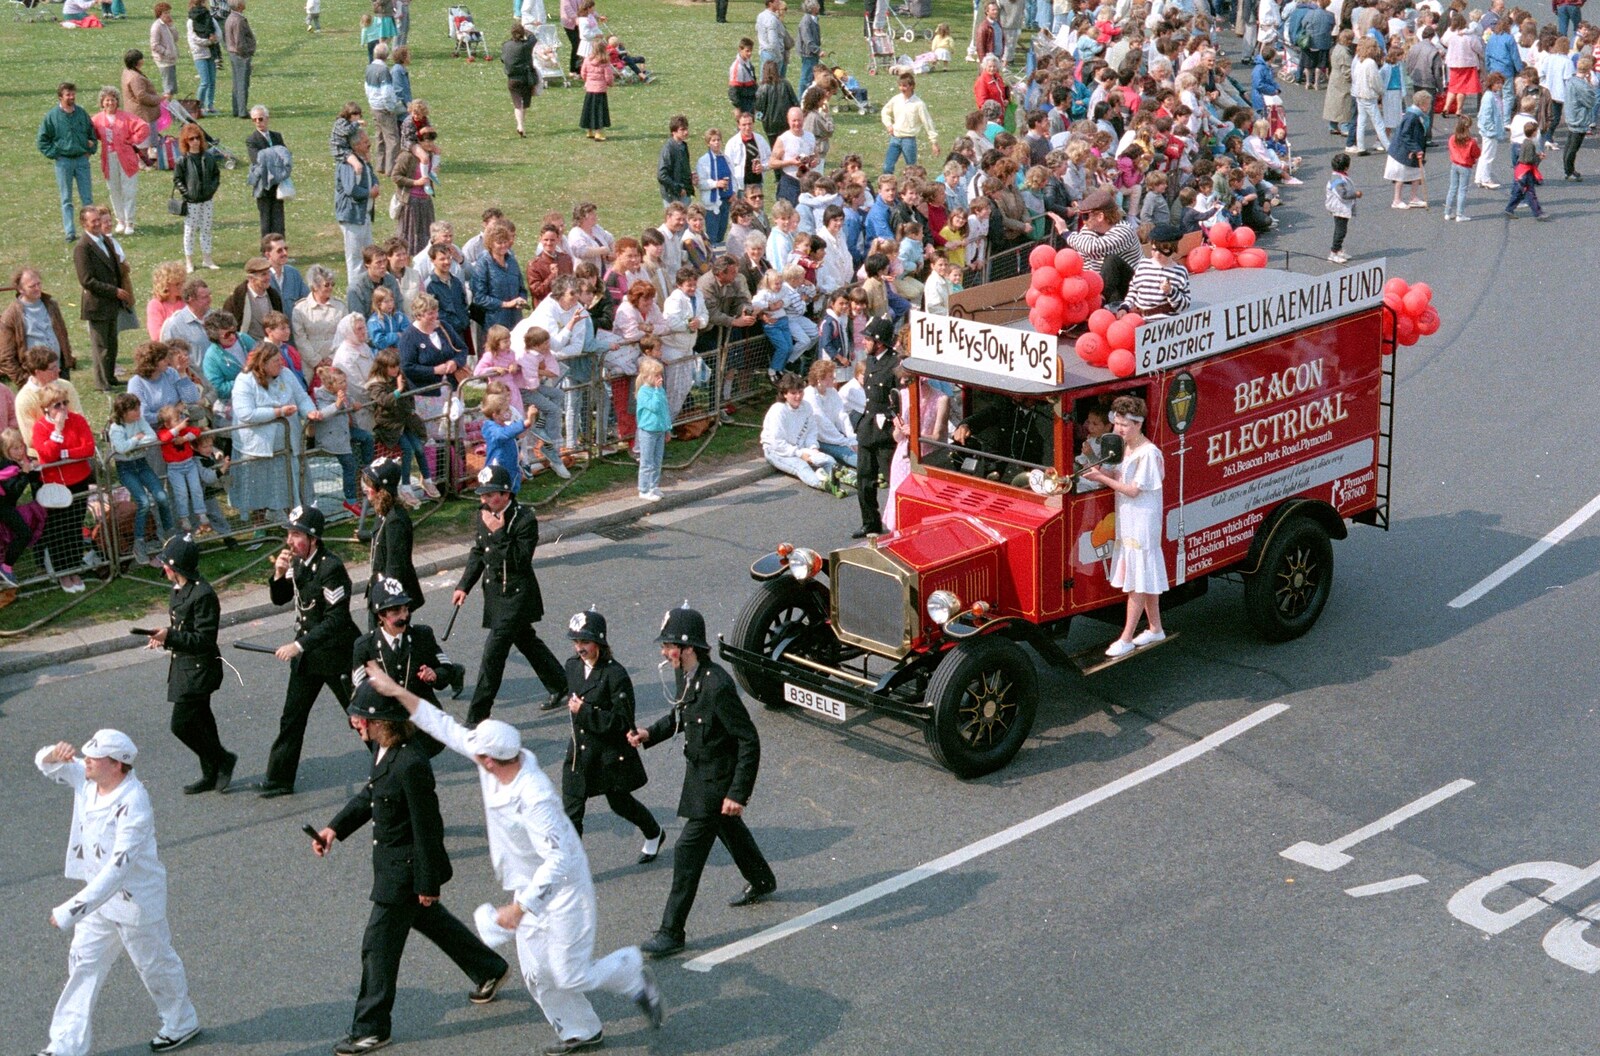 The Beacon Electrical repro vintage van from Chantal and Andy's Wedding, and the Lord Mayor's Parade, Plymouth - 20th May 1987